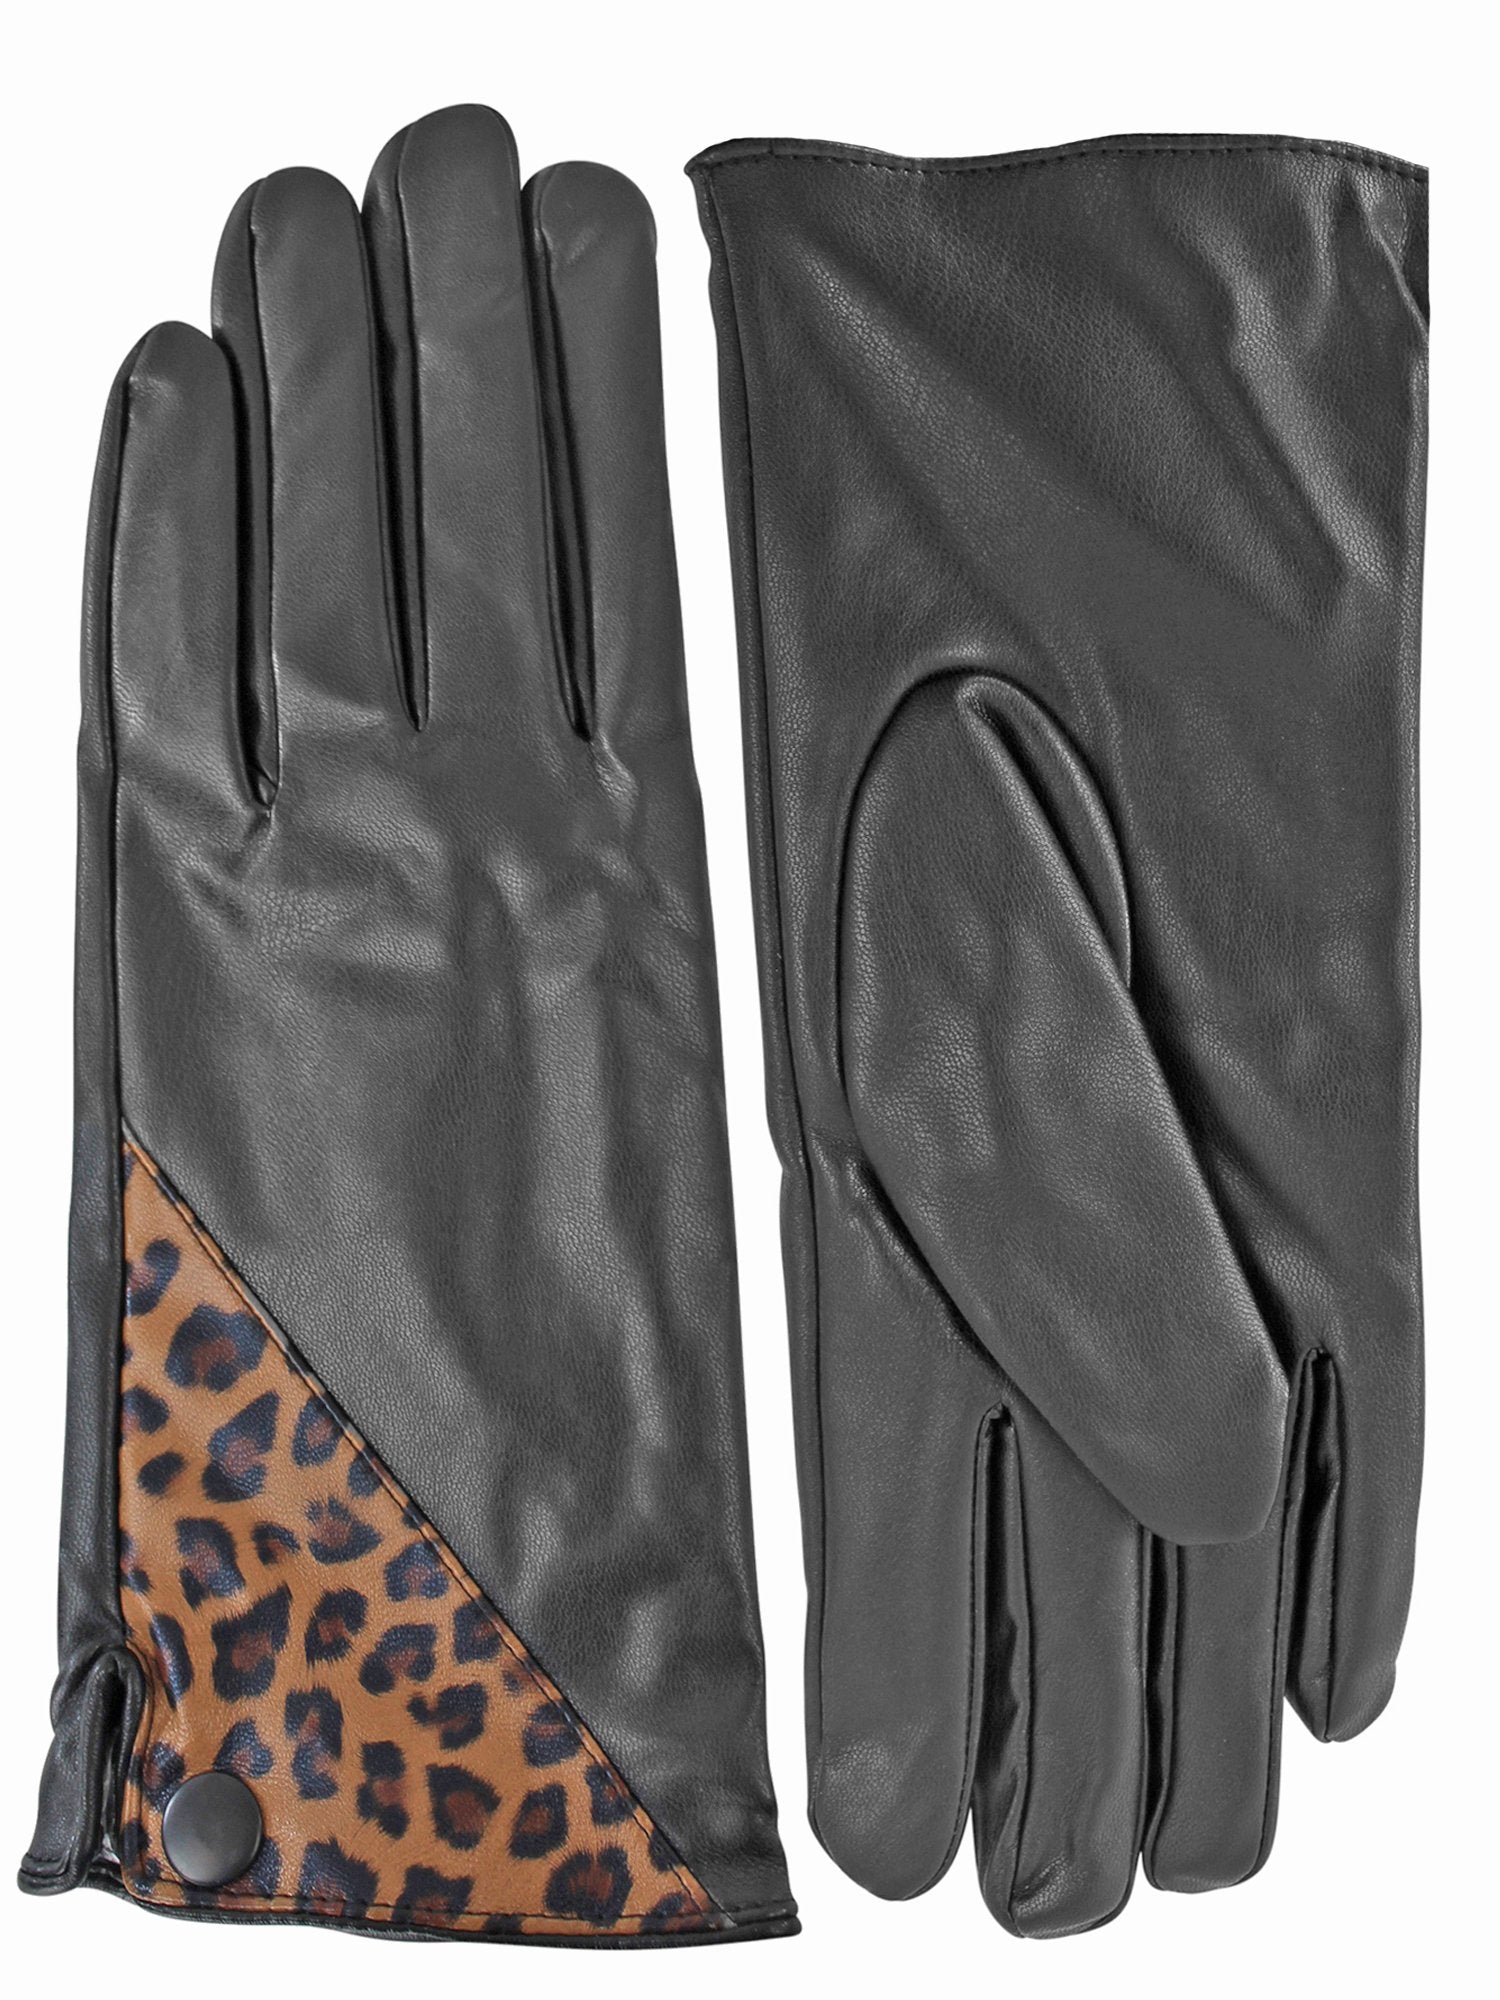 Black Vegan Leather Gloves With Leopard Print Accent